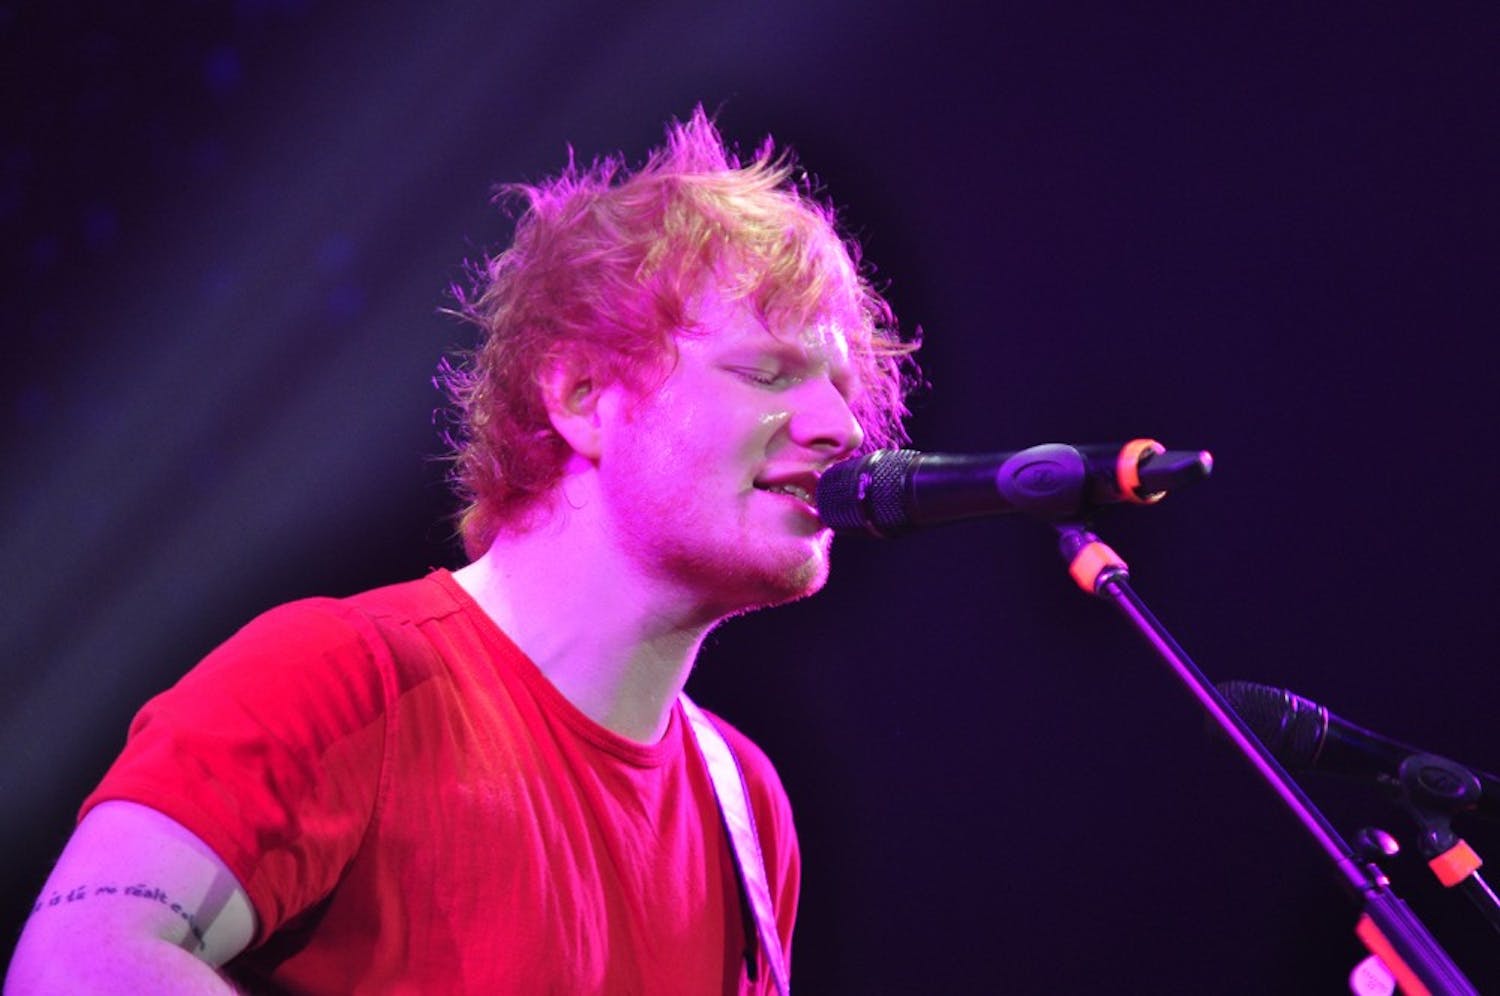 Ed Sheeran opened for Taylor Swift Saturday at the Colonial Life Arena